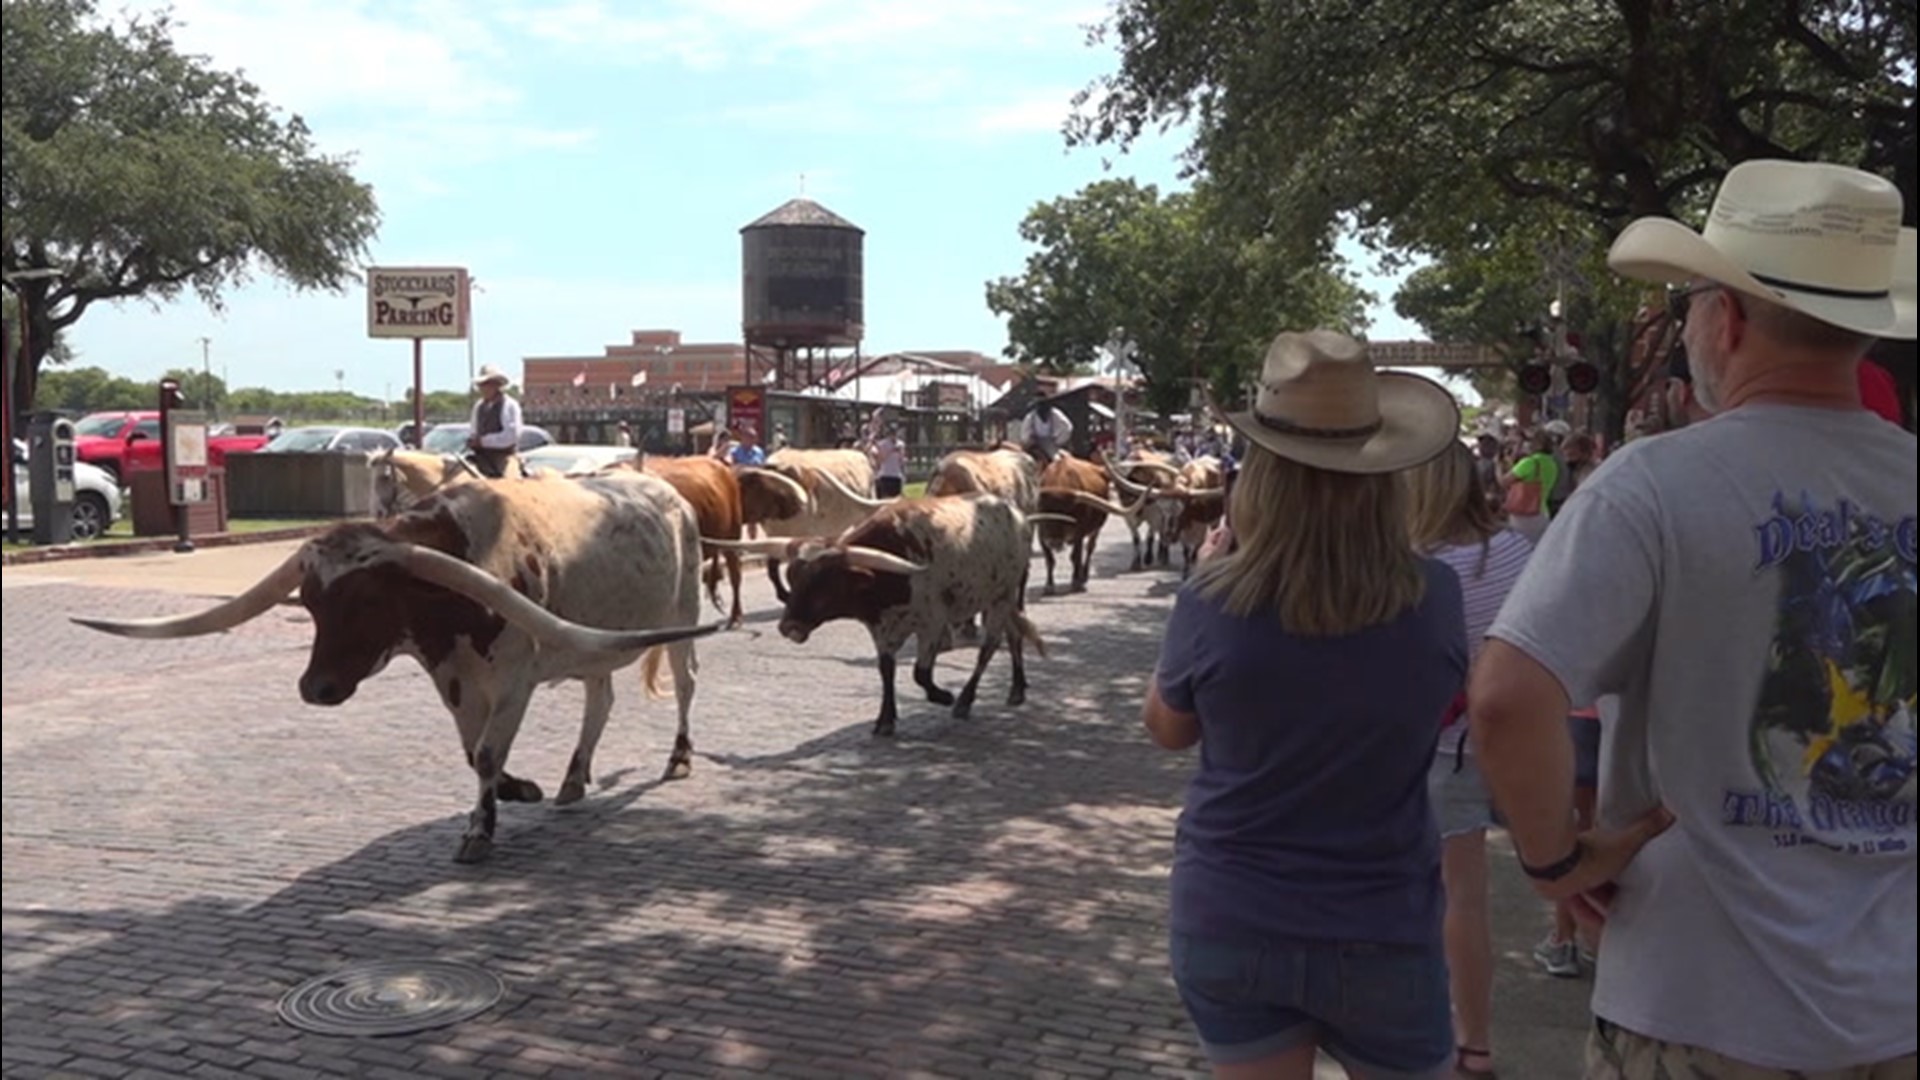 As a heat wave bakes the south and central Plains, organizers have been forced to cancel several of the historic Fort Worth cattle drives because of the heat.